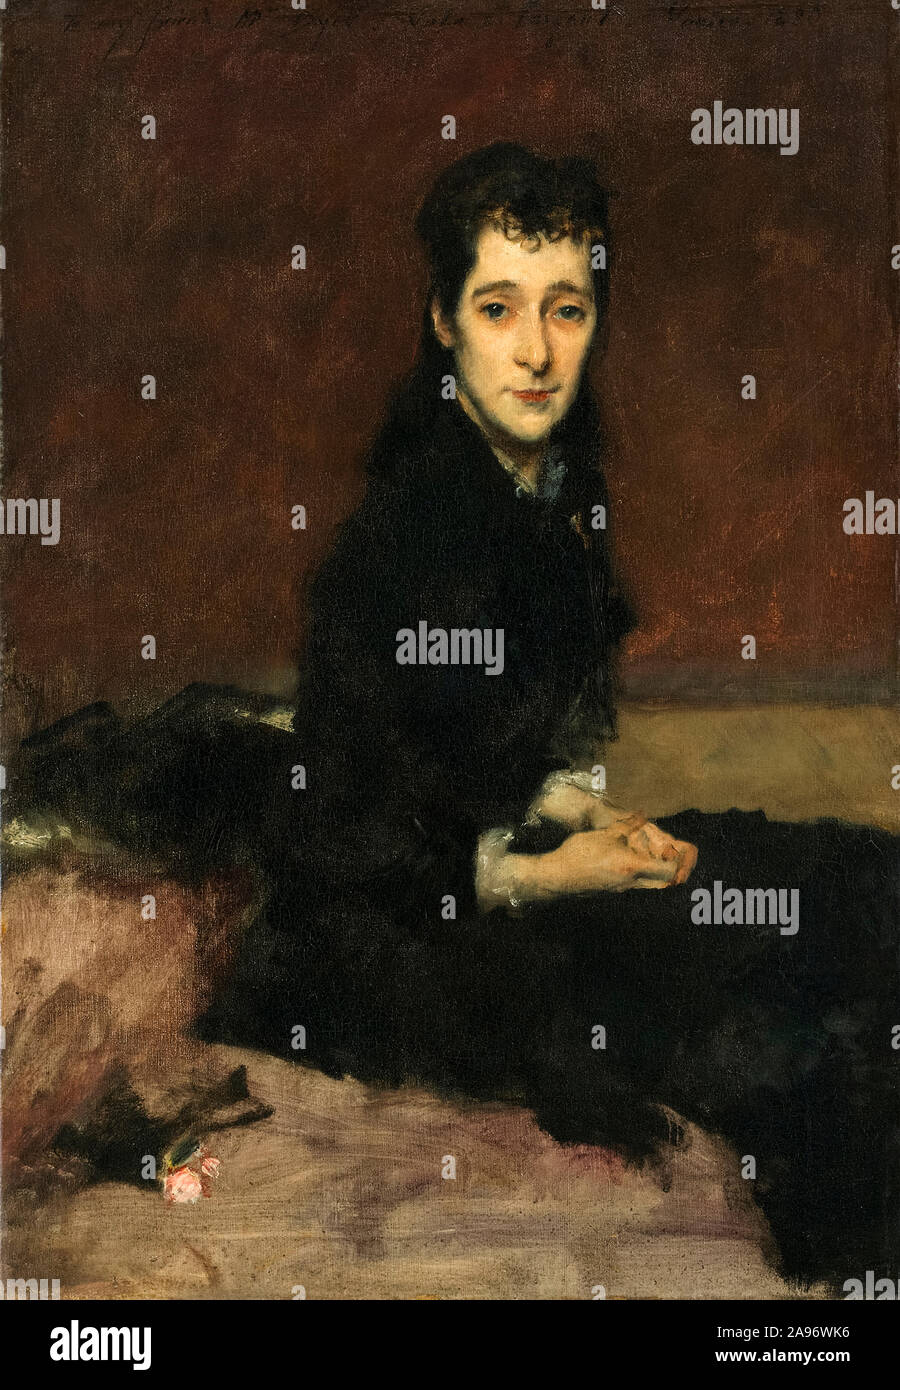 John Singer Sargent, Mme Charles Gifford Dyer, (Mary Anthony), portrait painting, 1880 Banque D'Images